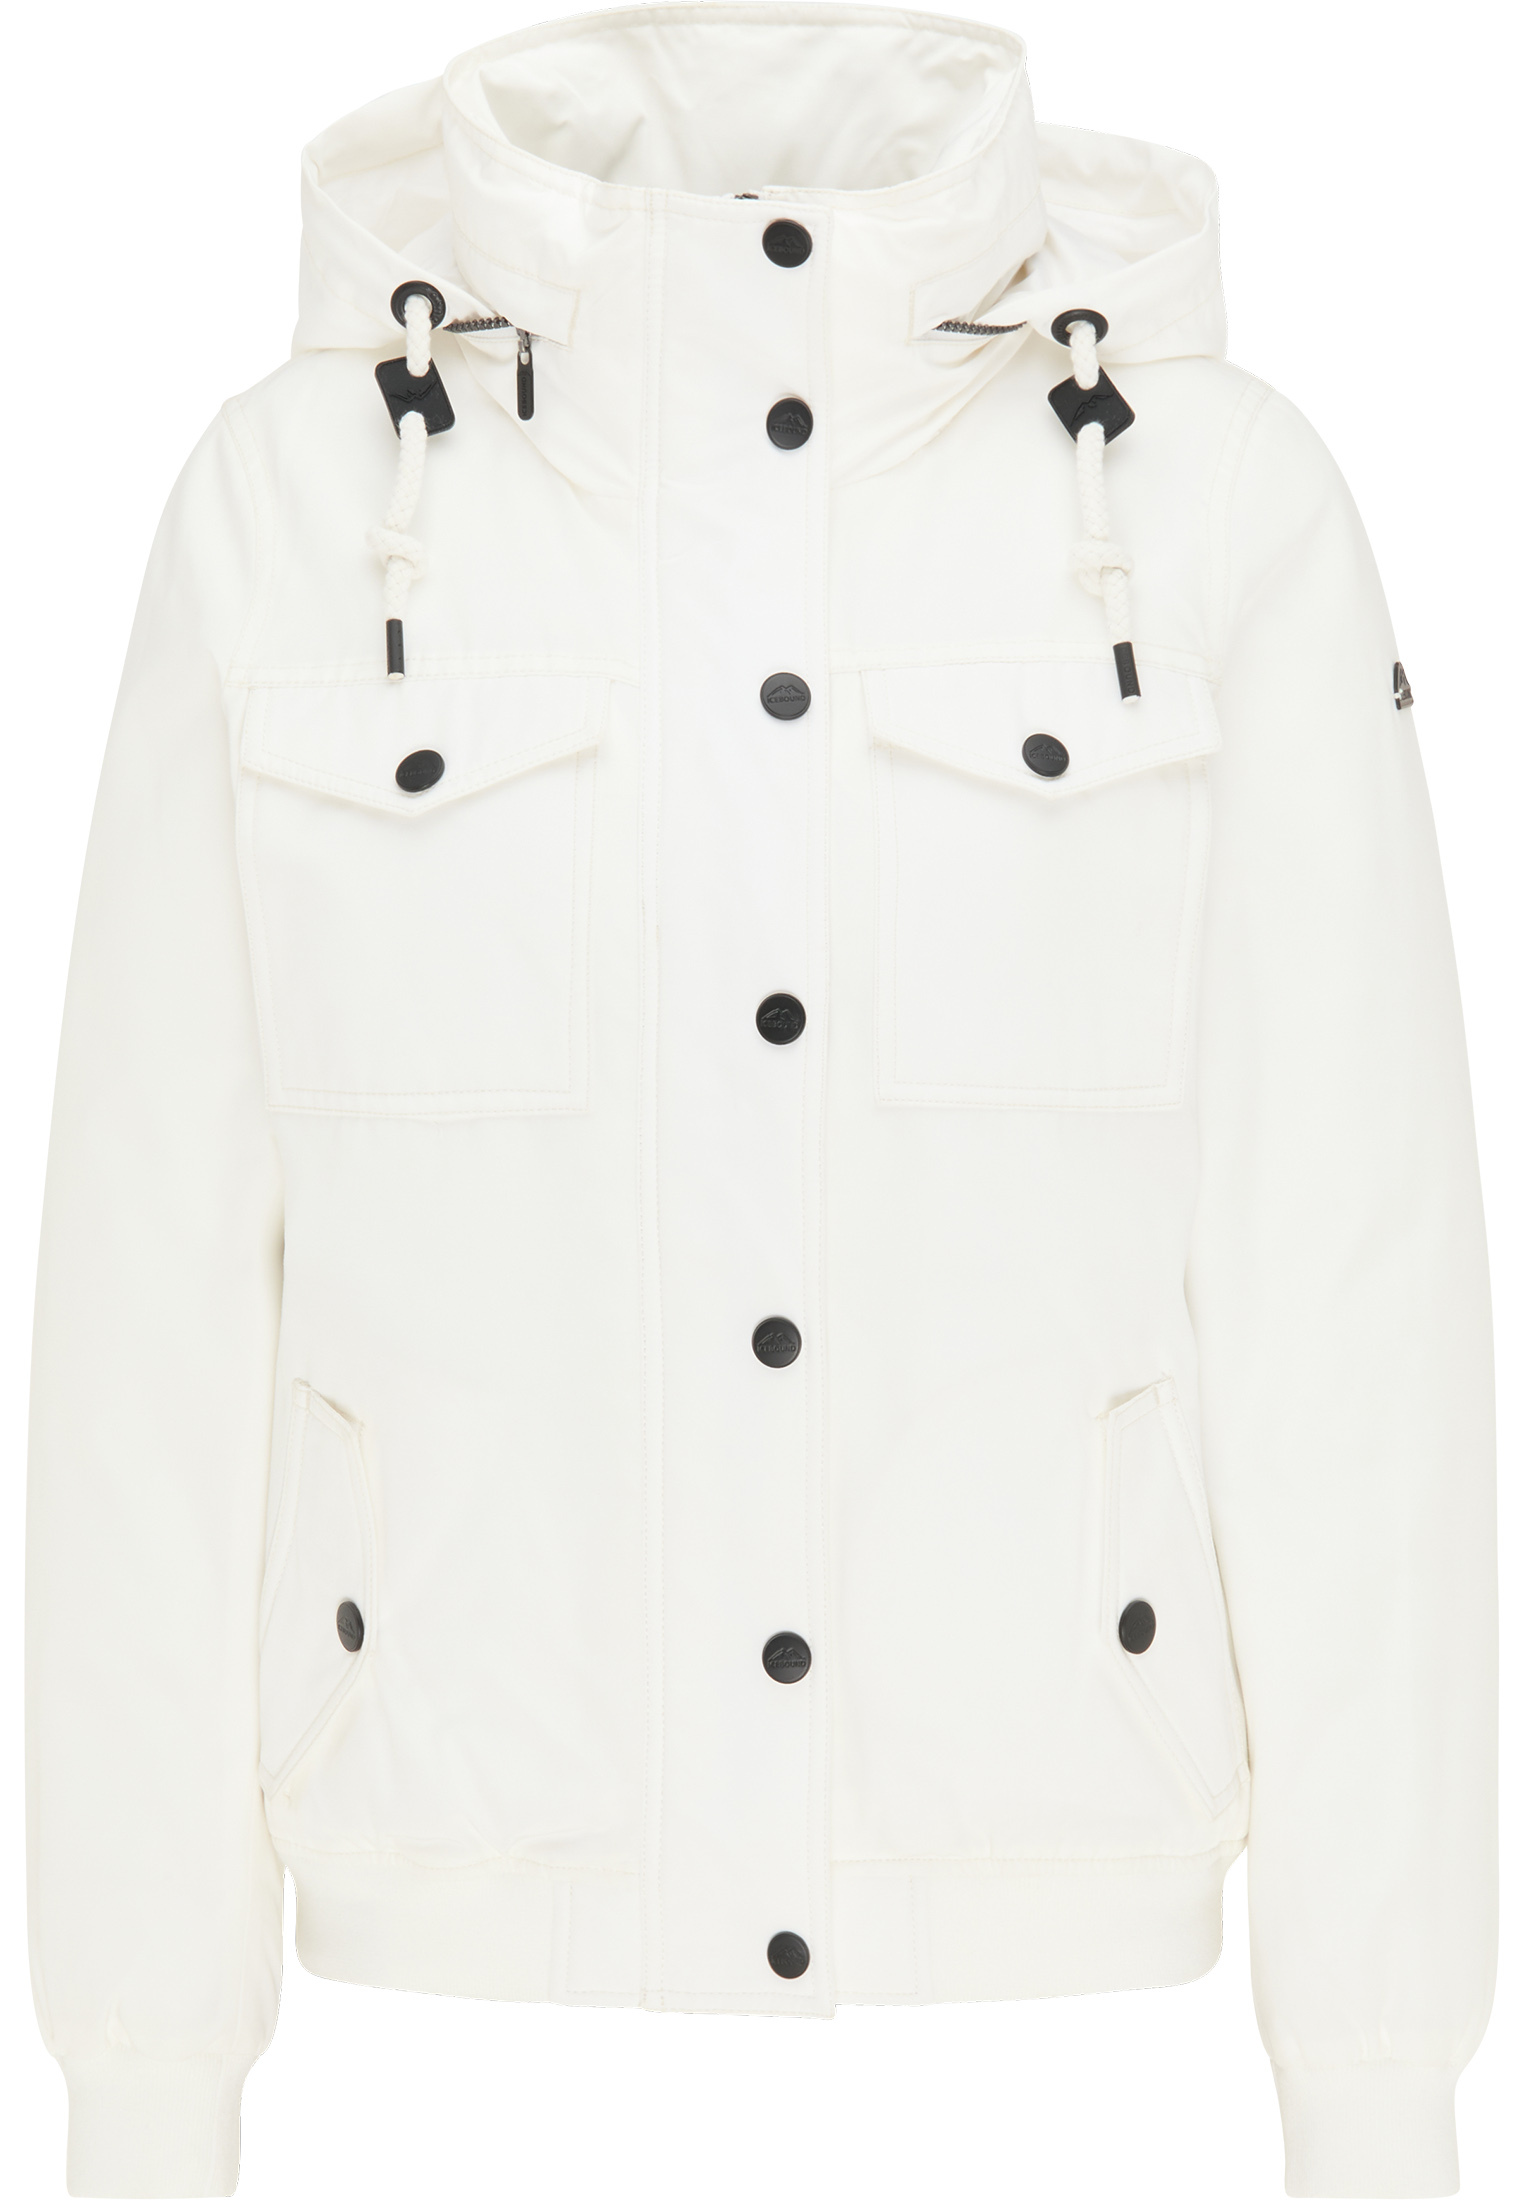 Taglie comode Donna ICEBOUND Giacca invernale in Bianco 